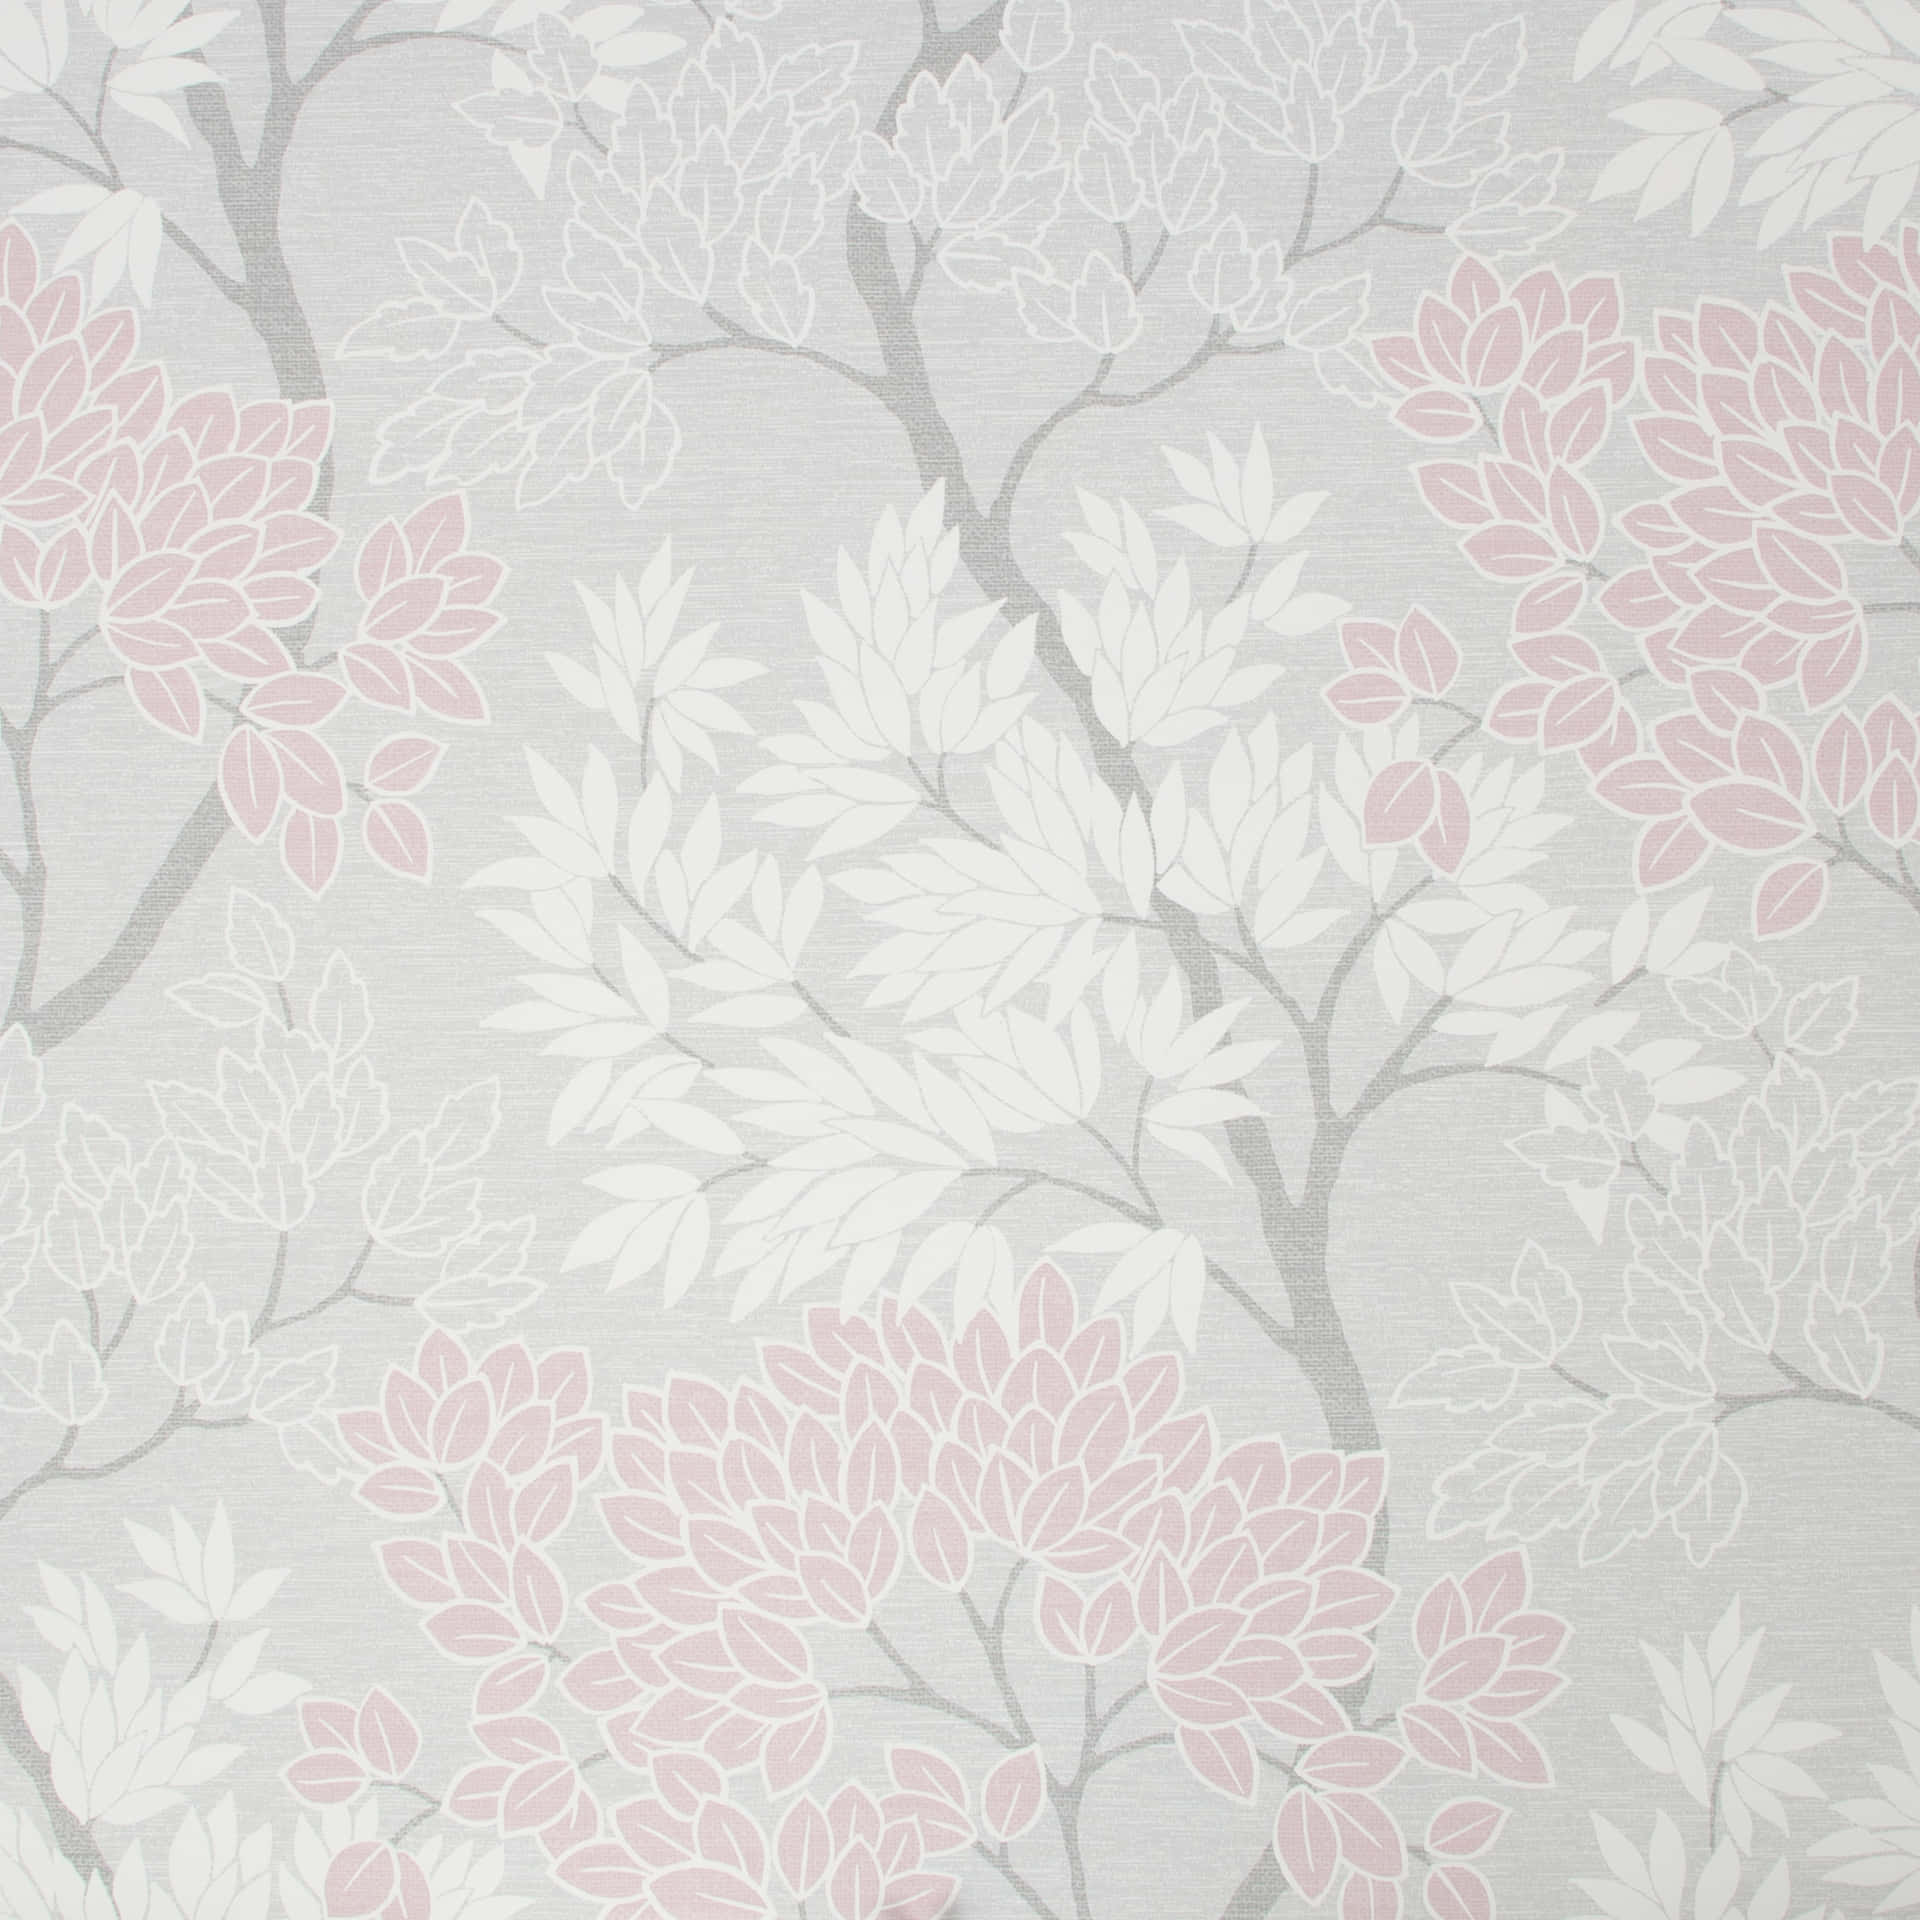 “A soft gradient of grey and pink creates an elegant and uplifting look.” Wallpaper